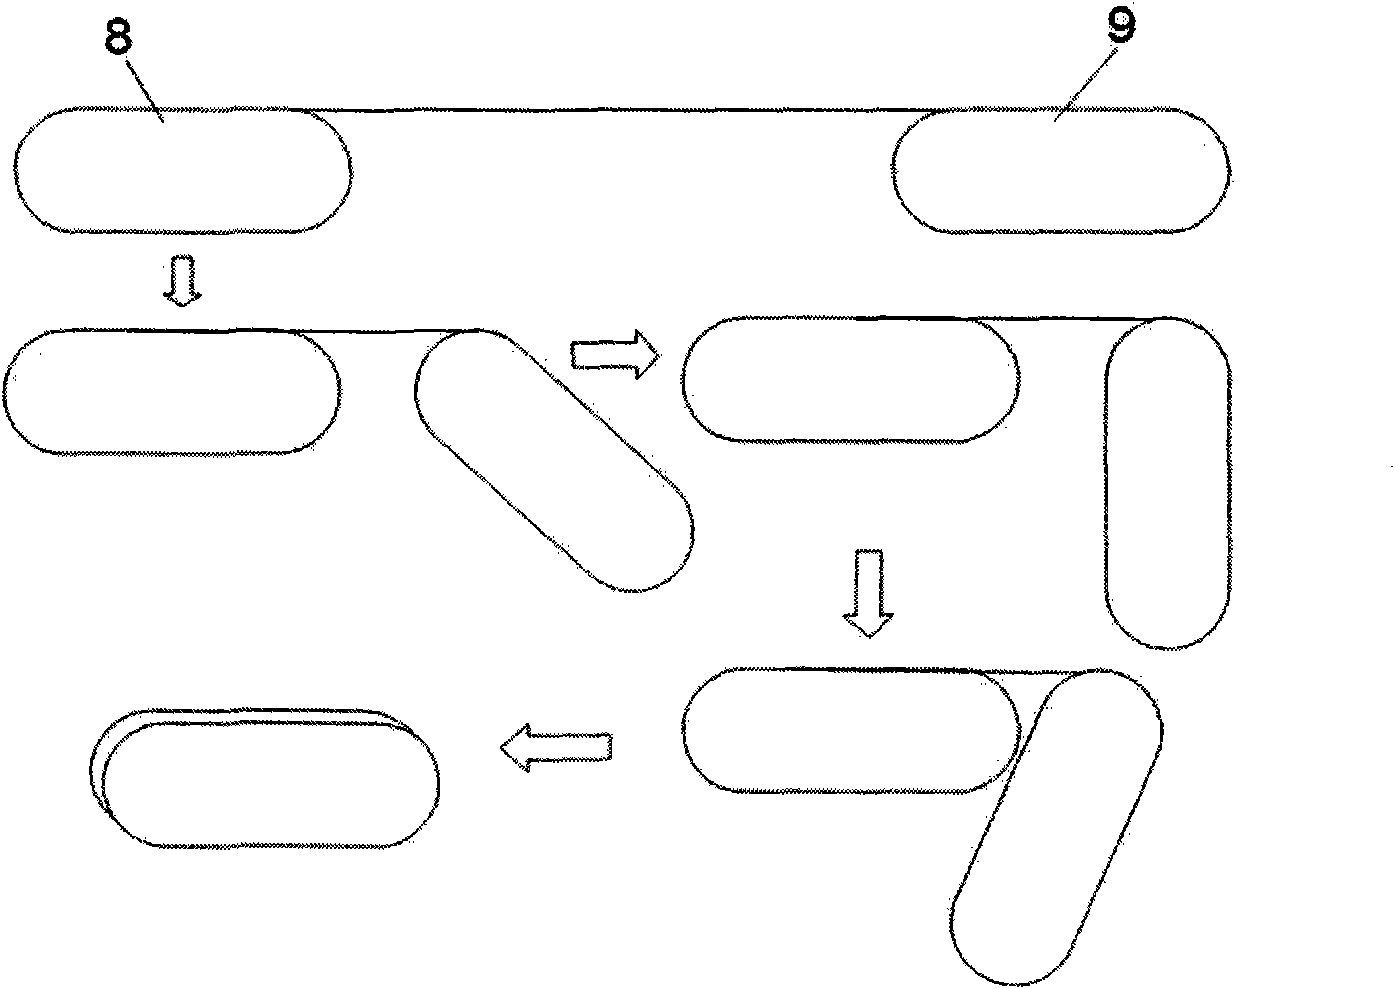 Method for winding superconductive magnet